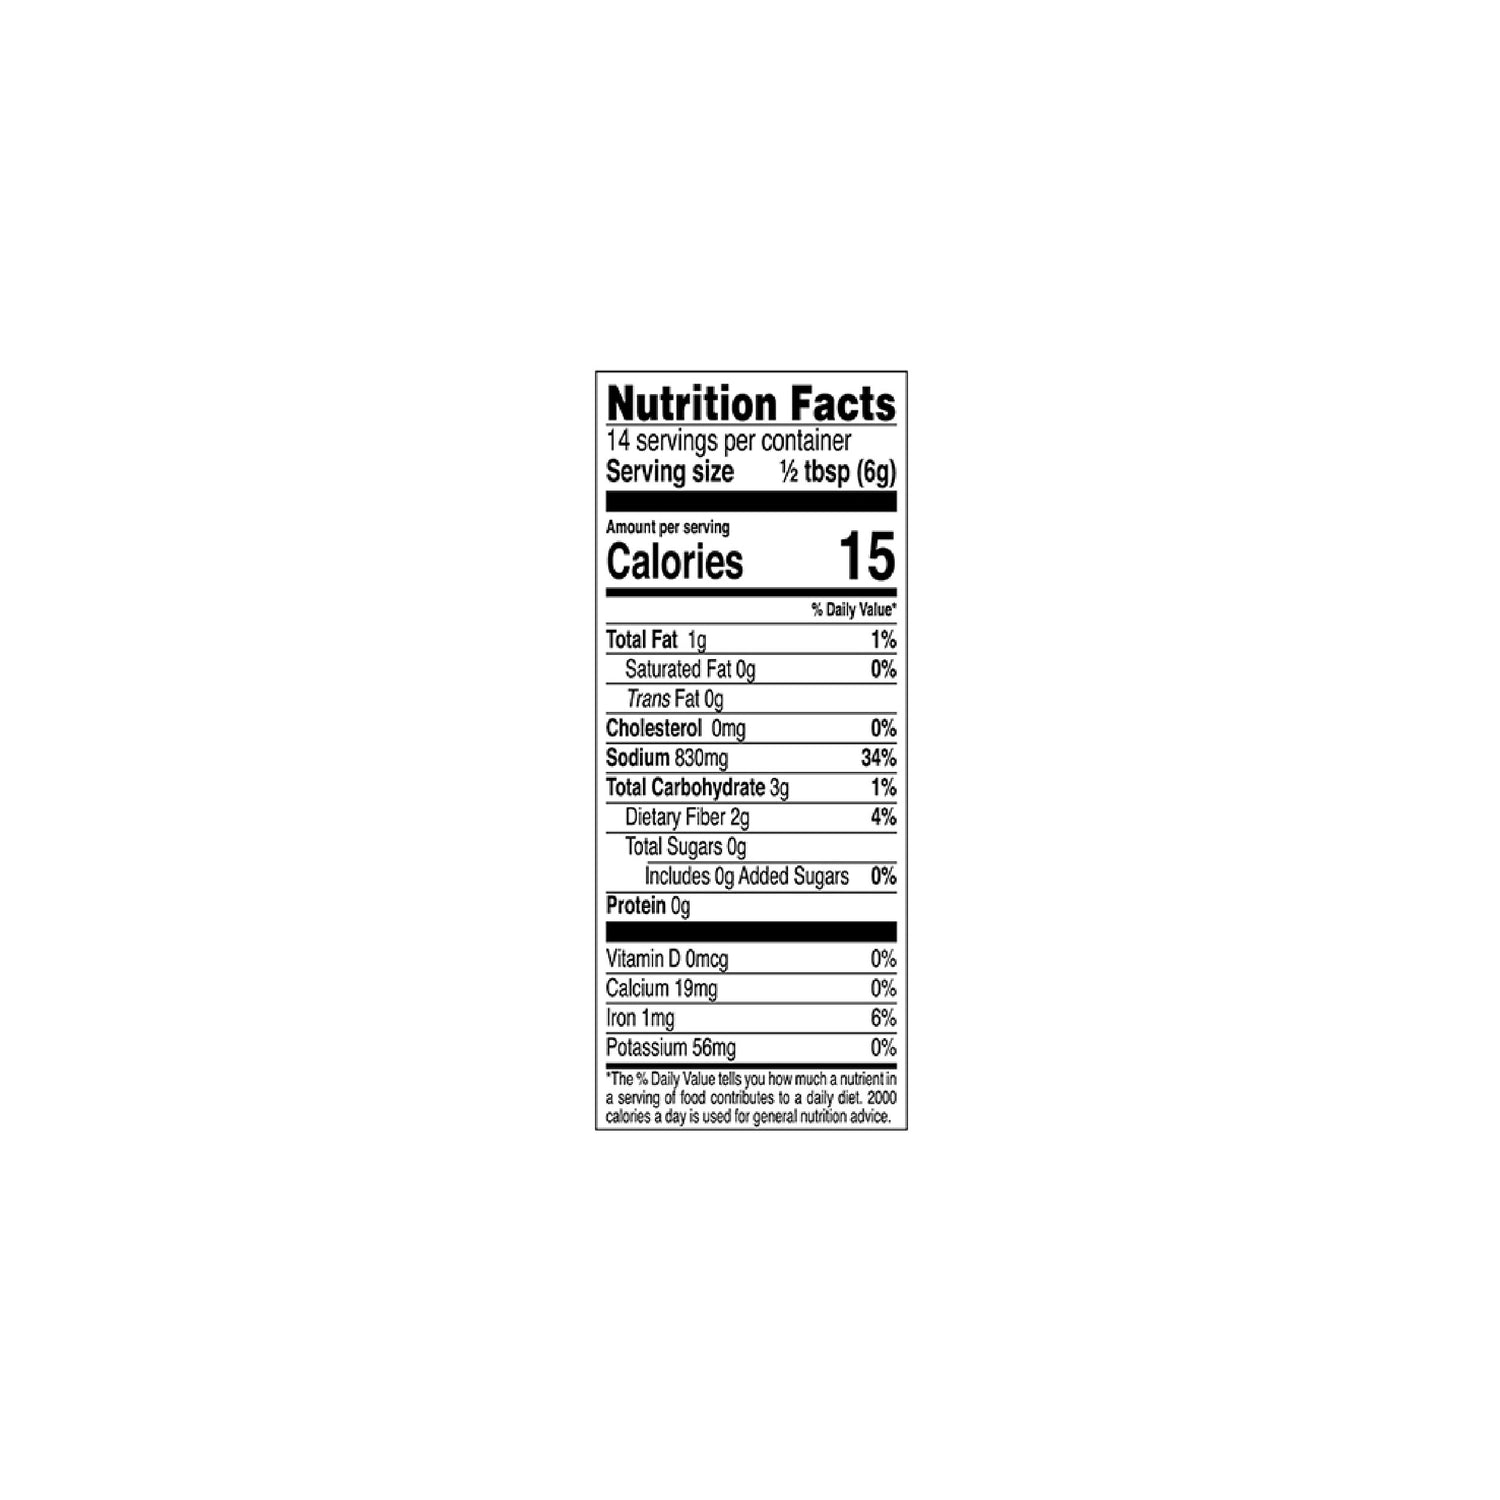 Nutritional facts National Quorma Masala